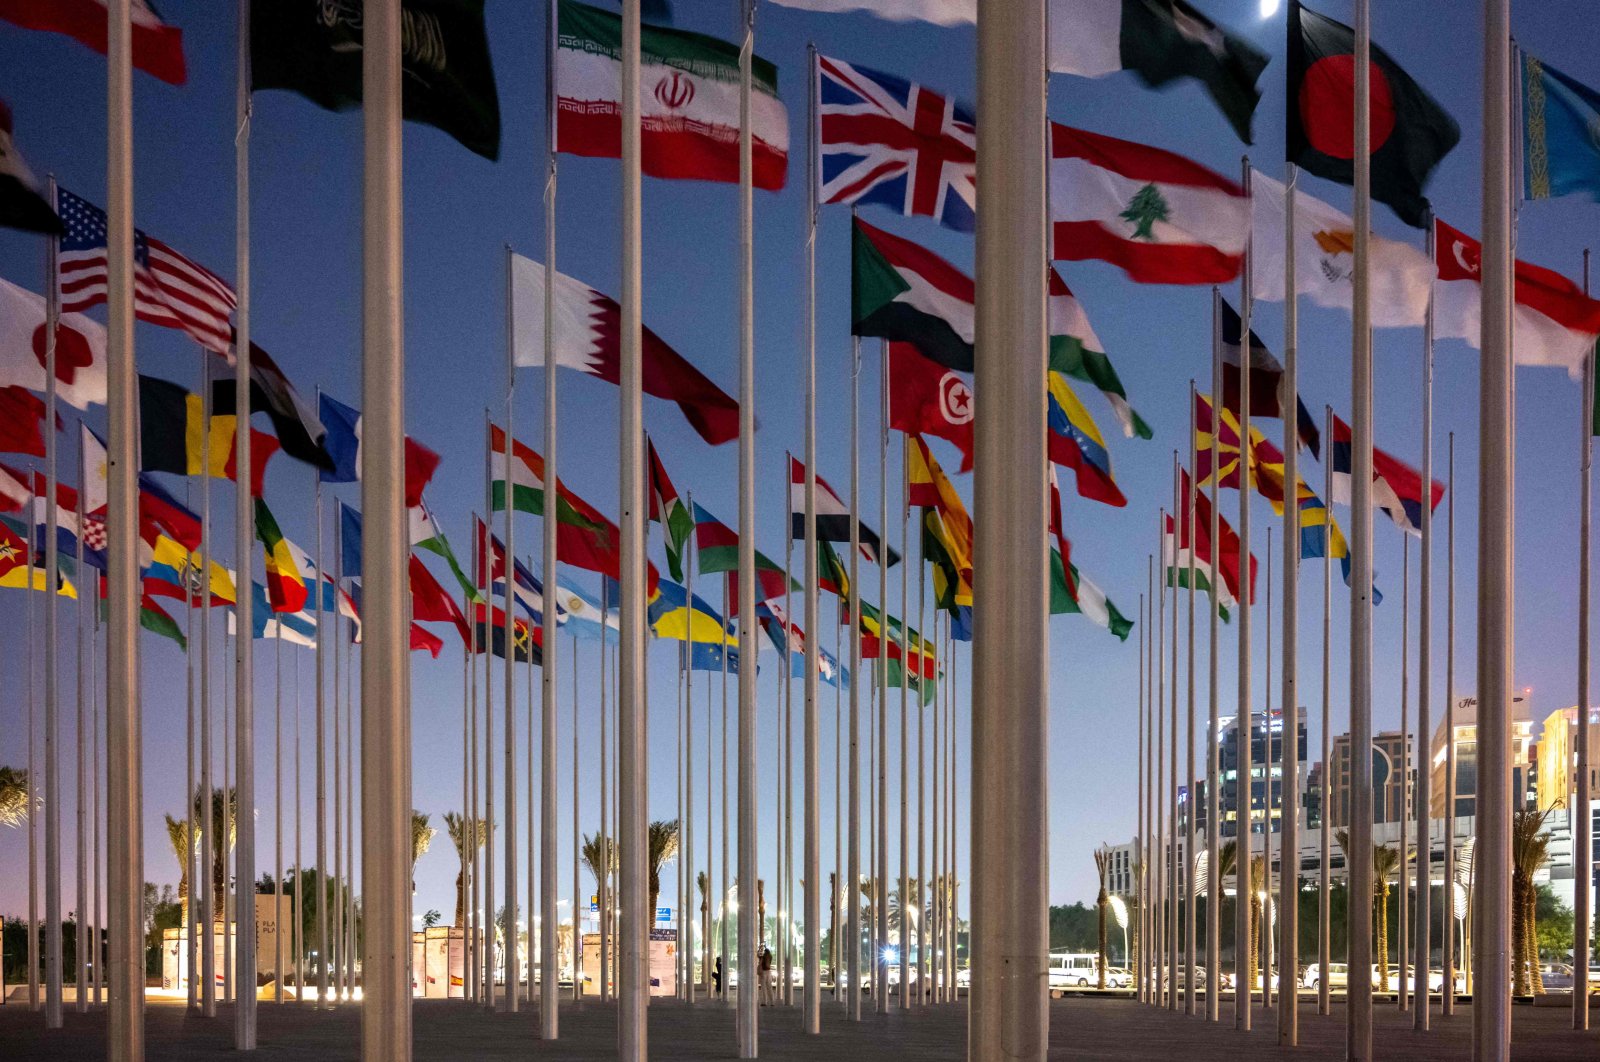 Flags representing nations with diplomatic missions accredited by the state of Qatar fly at Flag Plaza in the capital Doha, Oct. 4, 2022, ahead of the FIFA 2022 World Cup football competition. (AFP Photo)